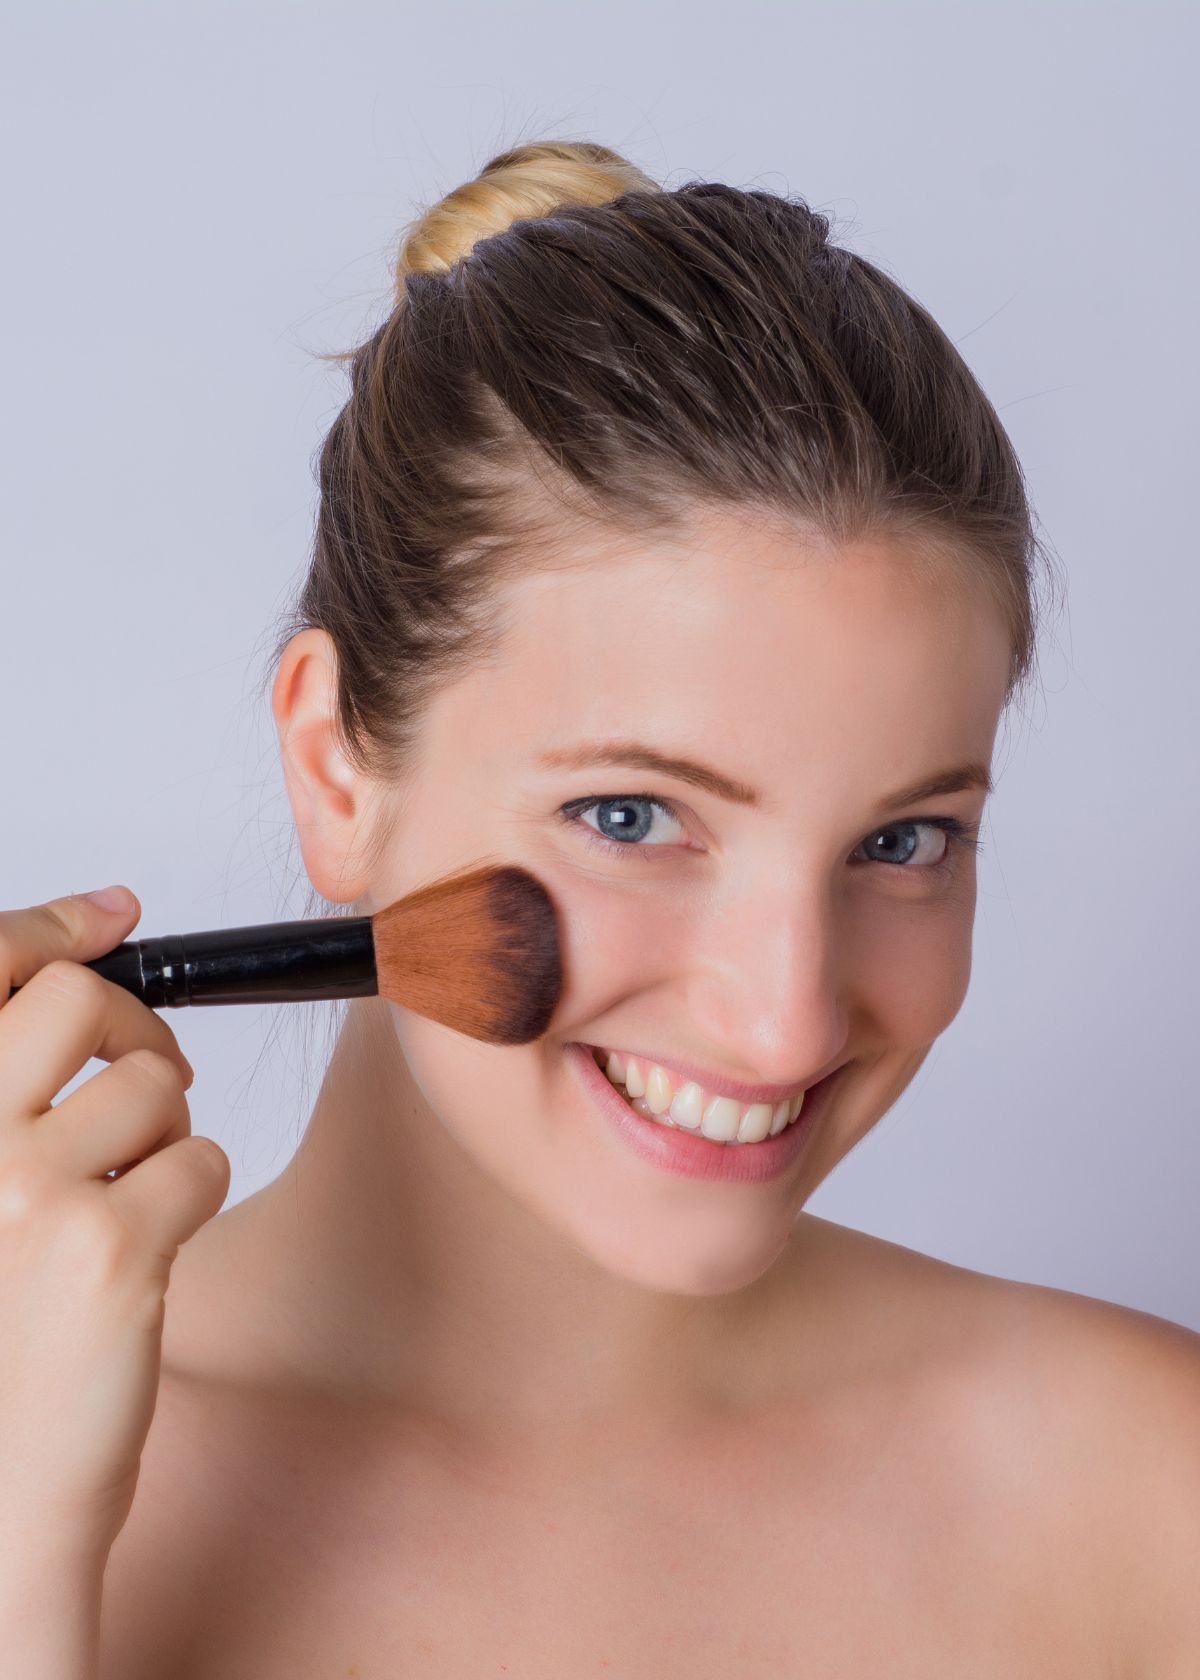 How to Apply Powder Foundation on Dry Skin